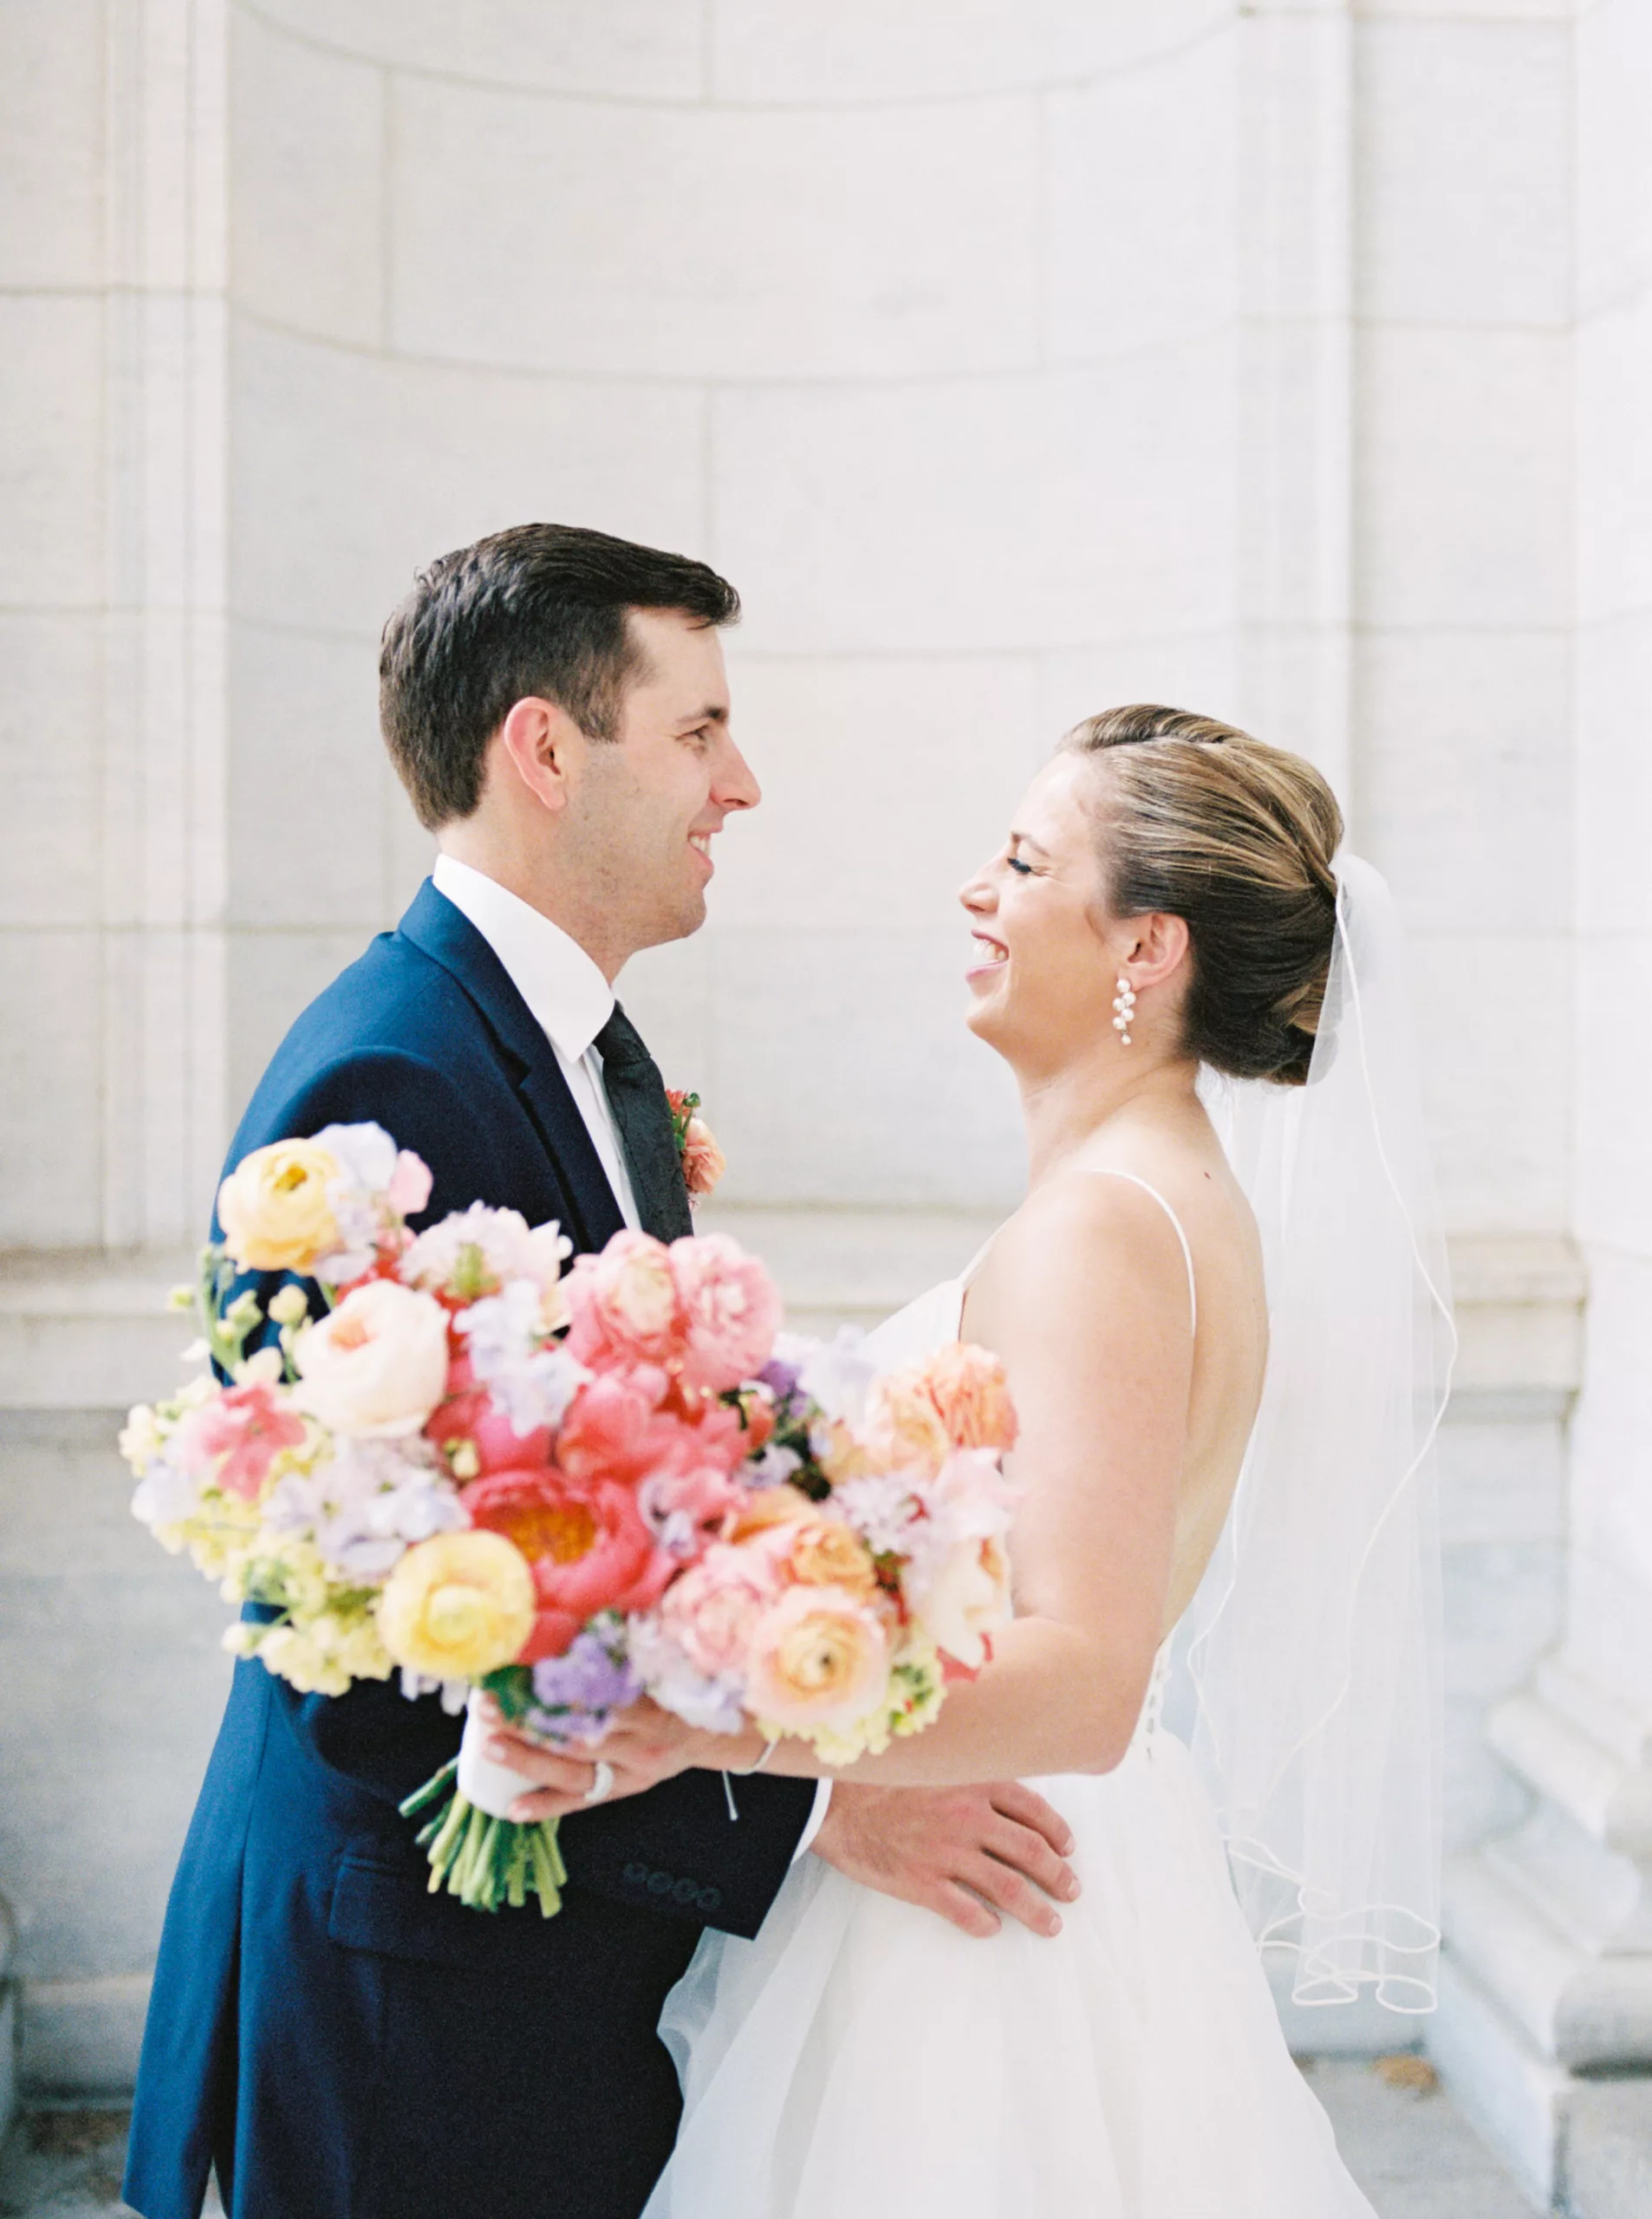 Stunning pastel floral wedding at Des Moines Golf and Country Club